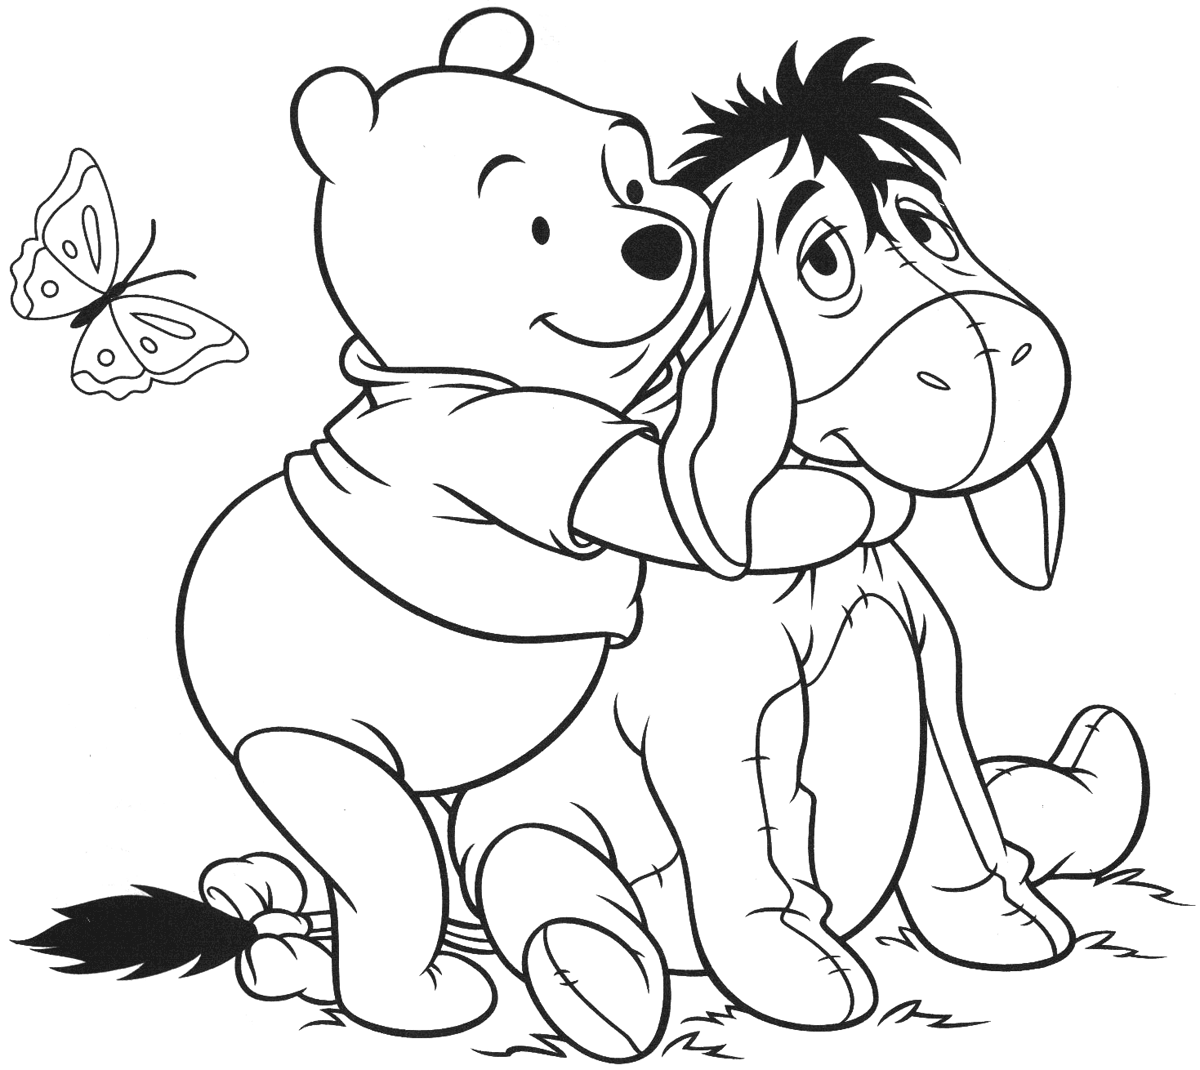 Coloring Pages | Pooh Hugs Eeyore Coloring Page